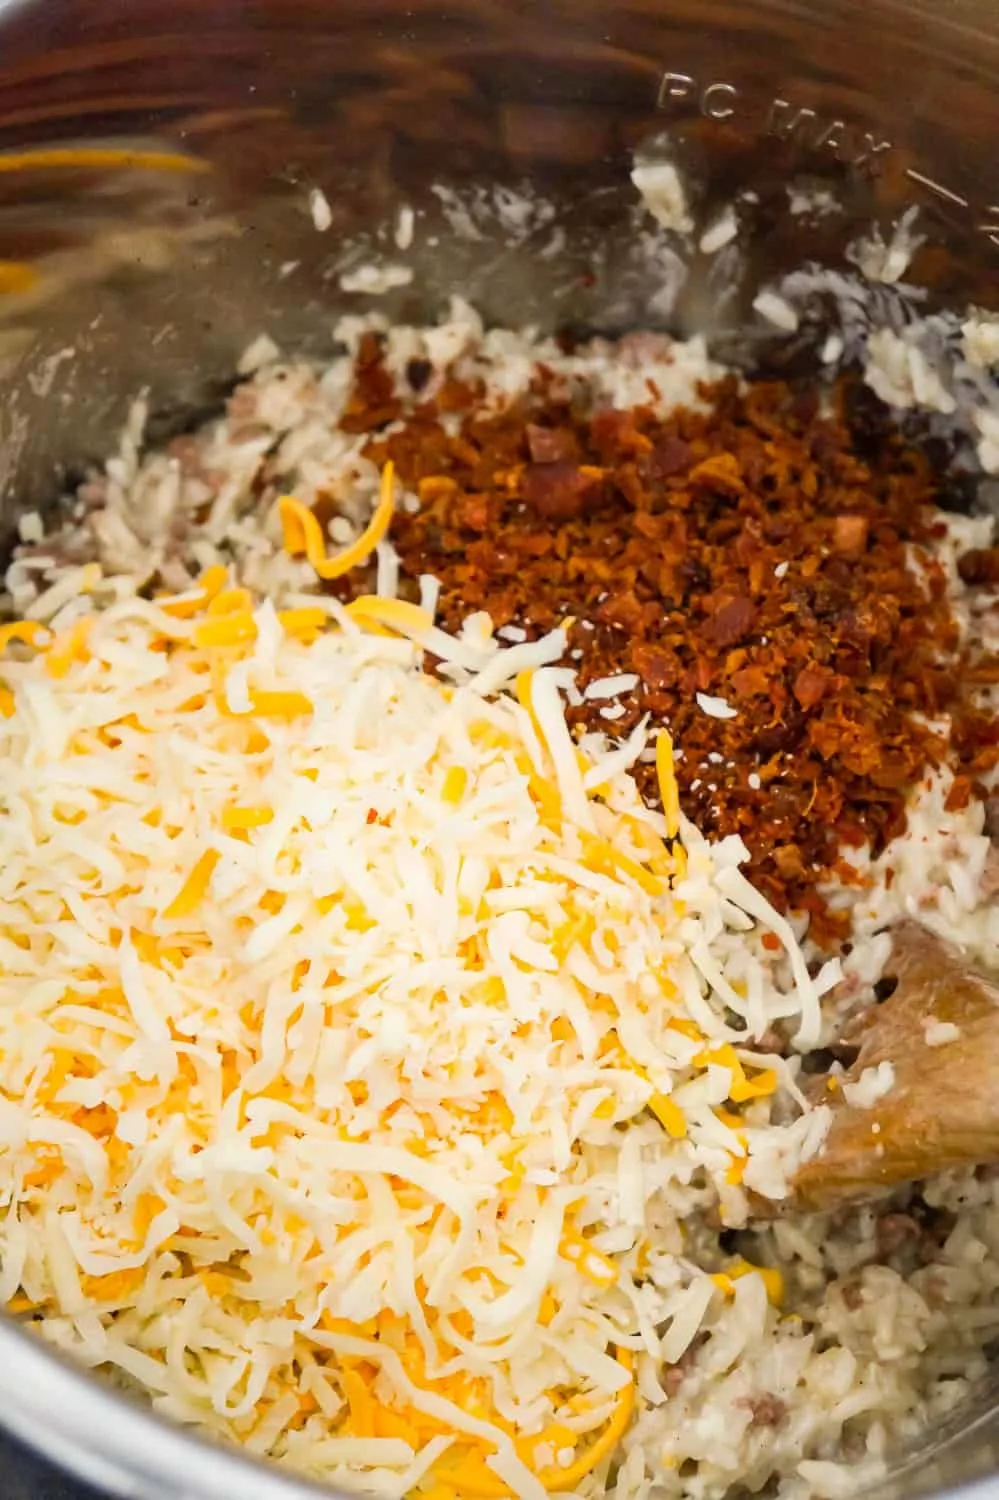 shredded mozzarella, cheddar and crumbled bacon on top of ground beef and rice in an Instant Pot